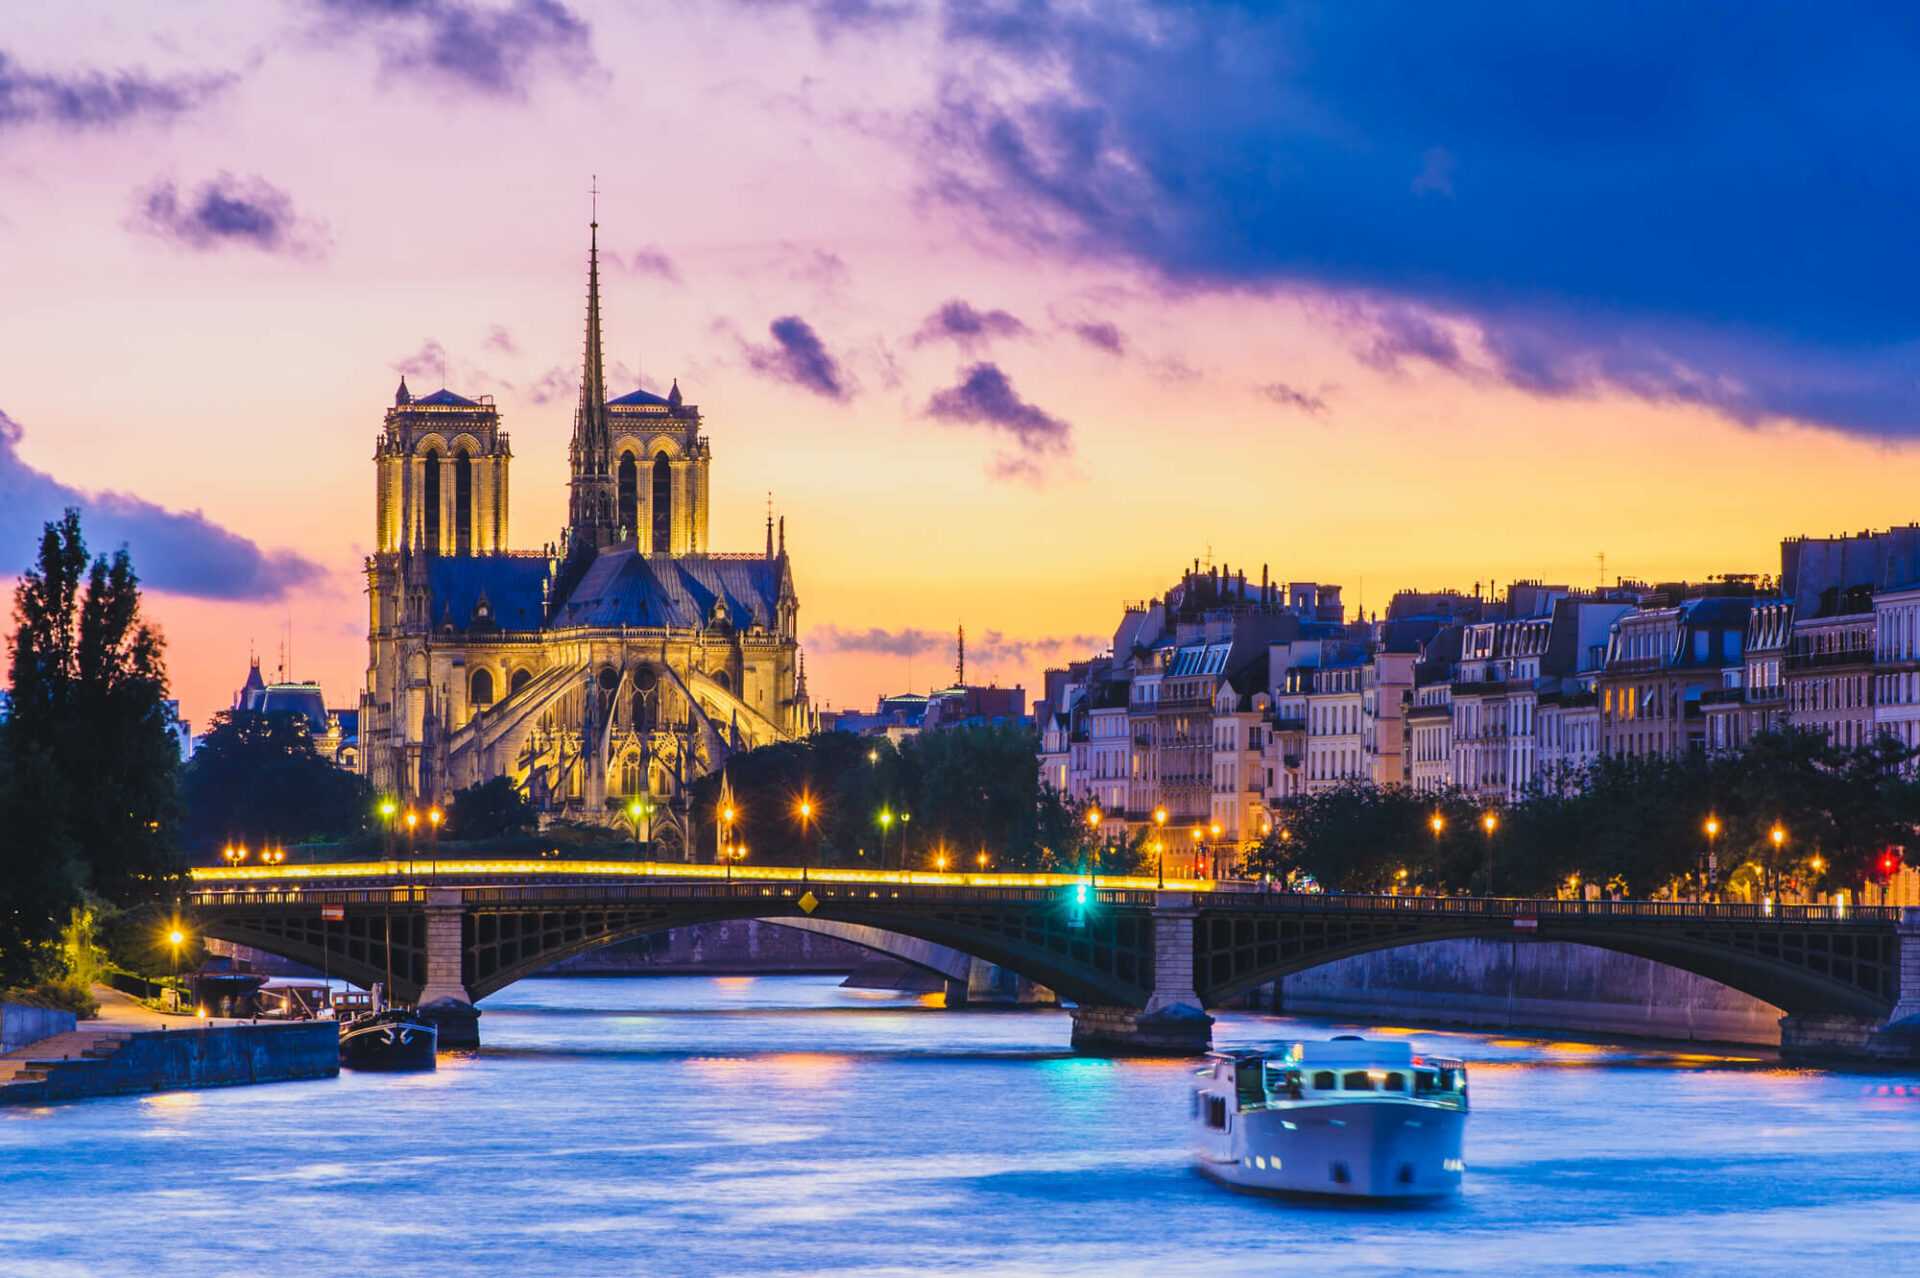 Seine River Dinner Cruise in Paris - This is what you need to know!